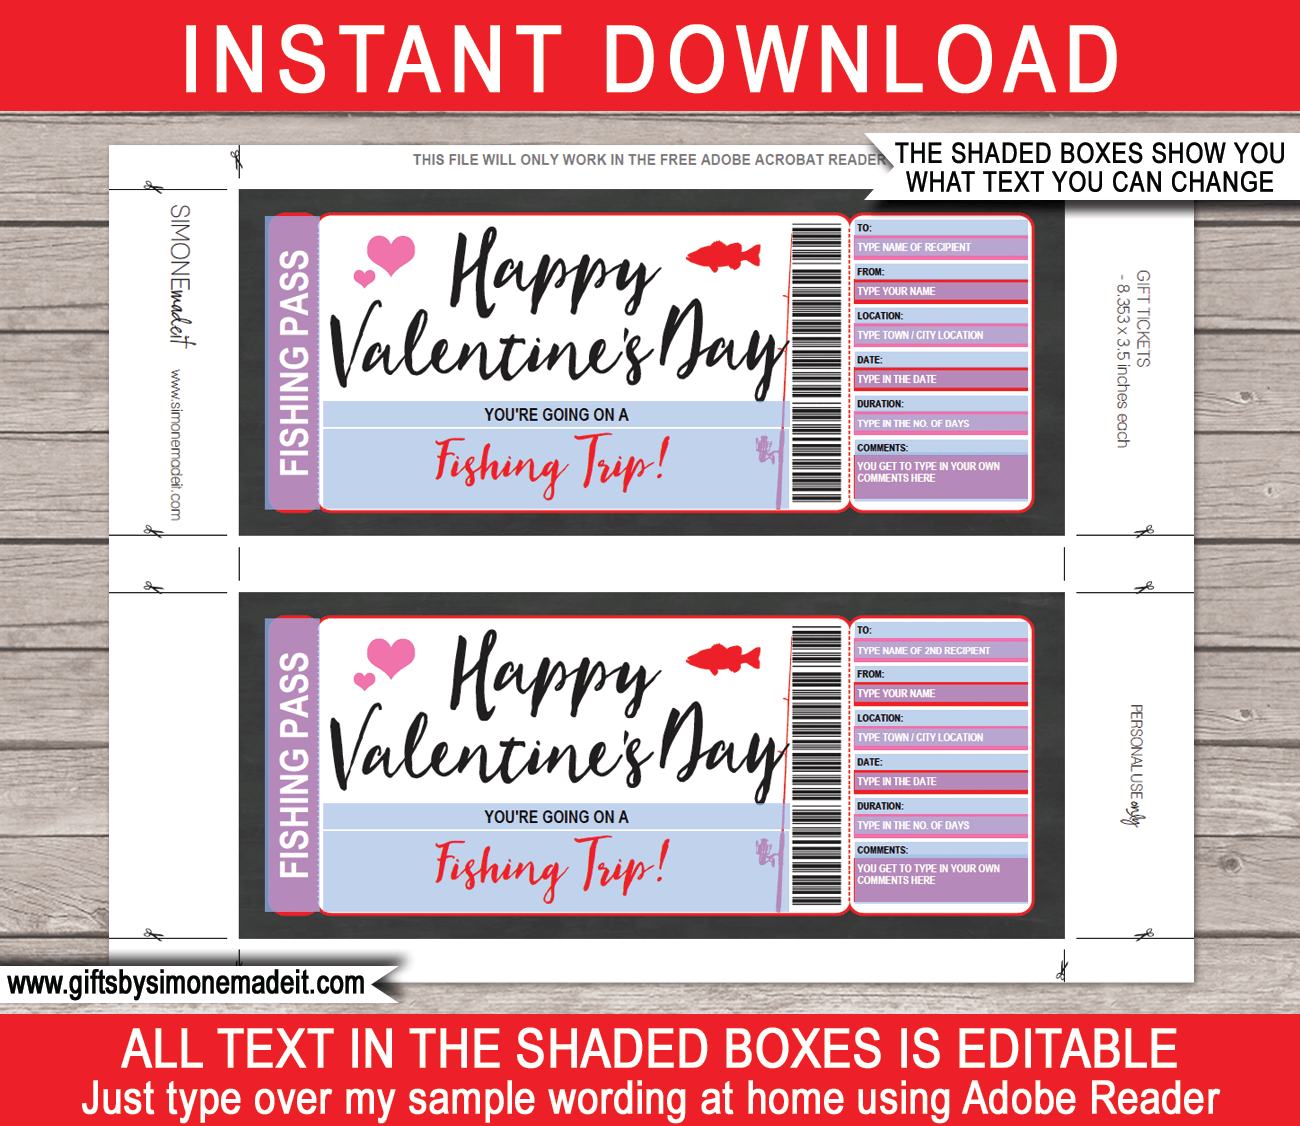 https://www.giftsbysimonemadeit.com/wp-content/uploads/2020/01/Valentines-Day-Fishing-Trip-Gift-Ticket-Template-screenshot.png